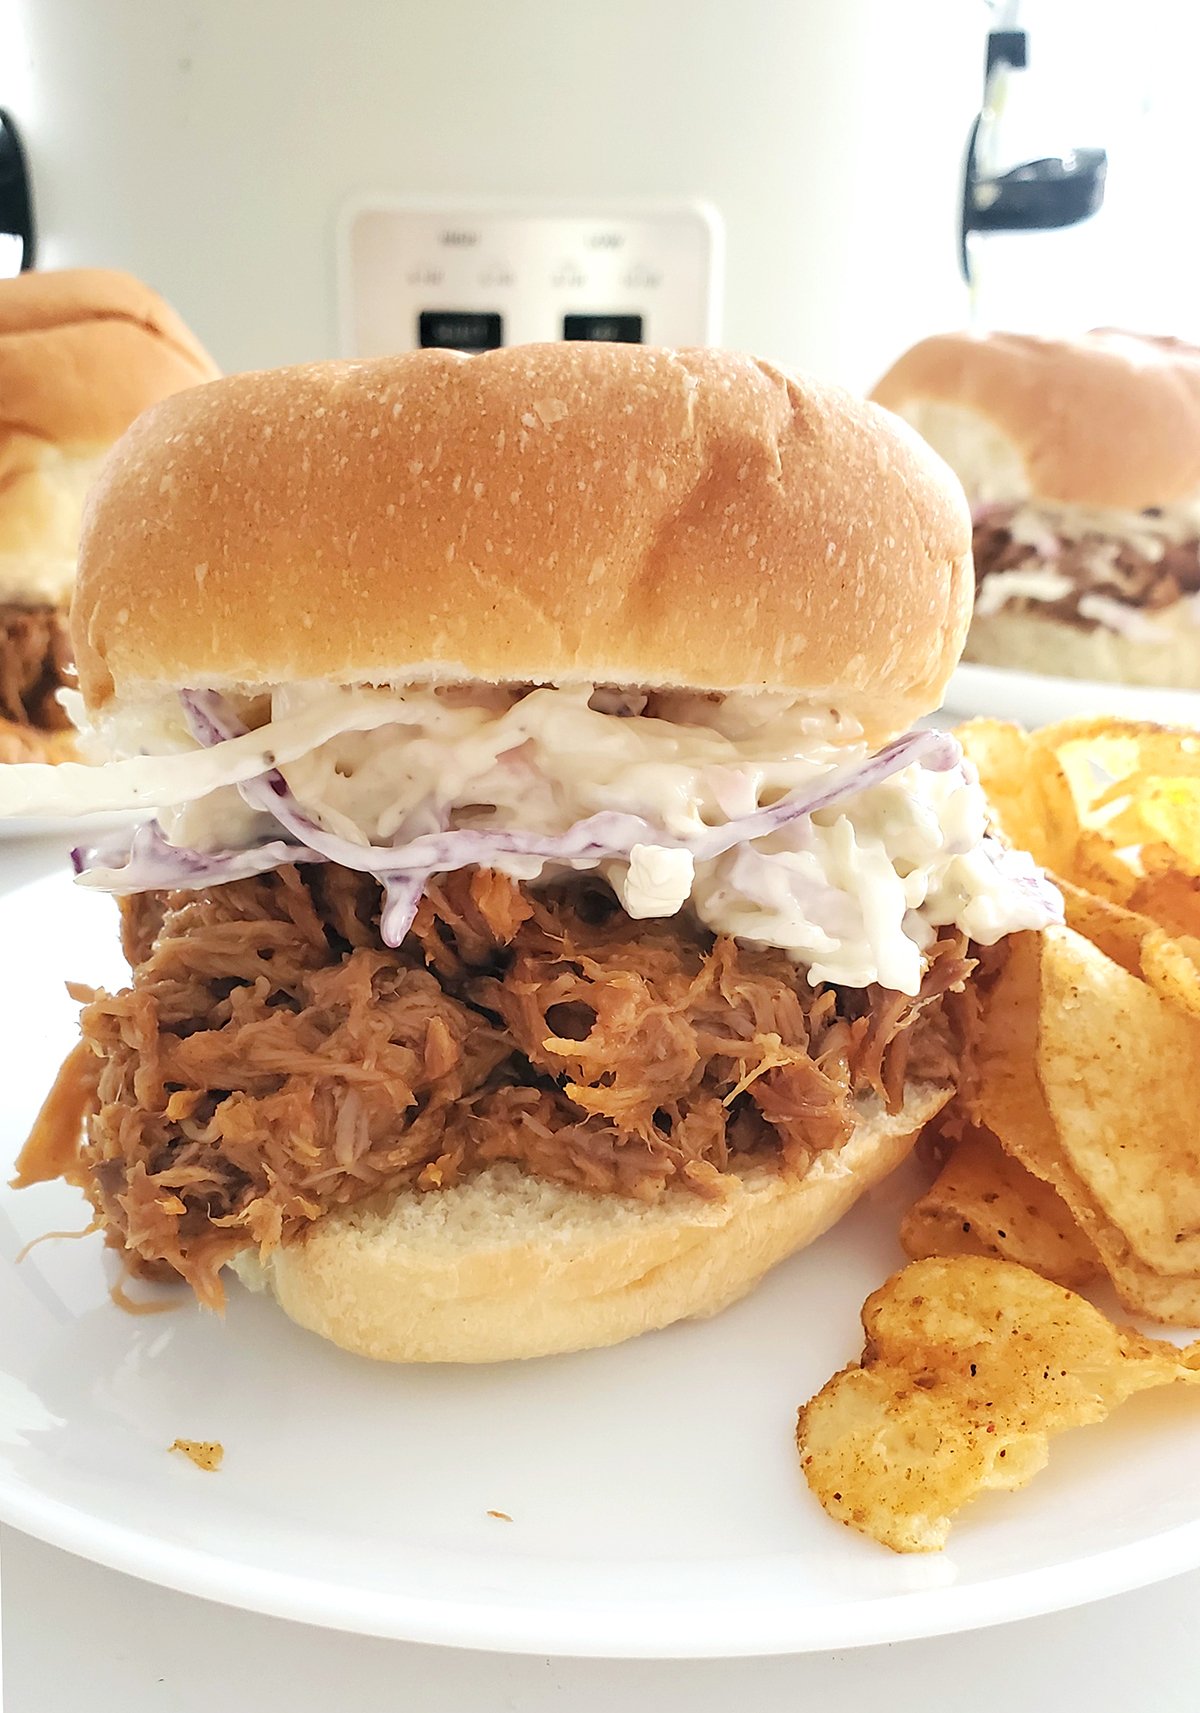 Shredded pork sandwich on a plated with a crockpot in the background